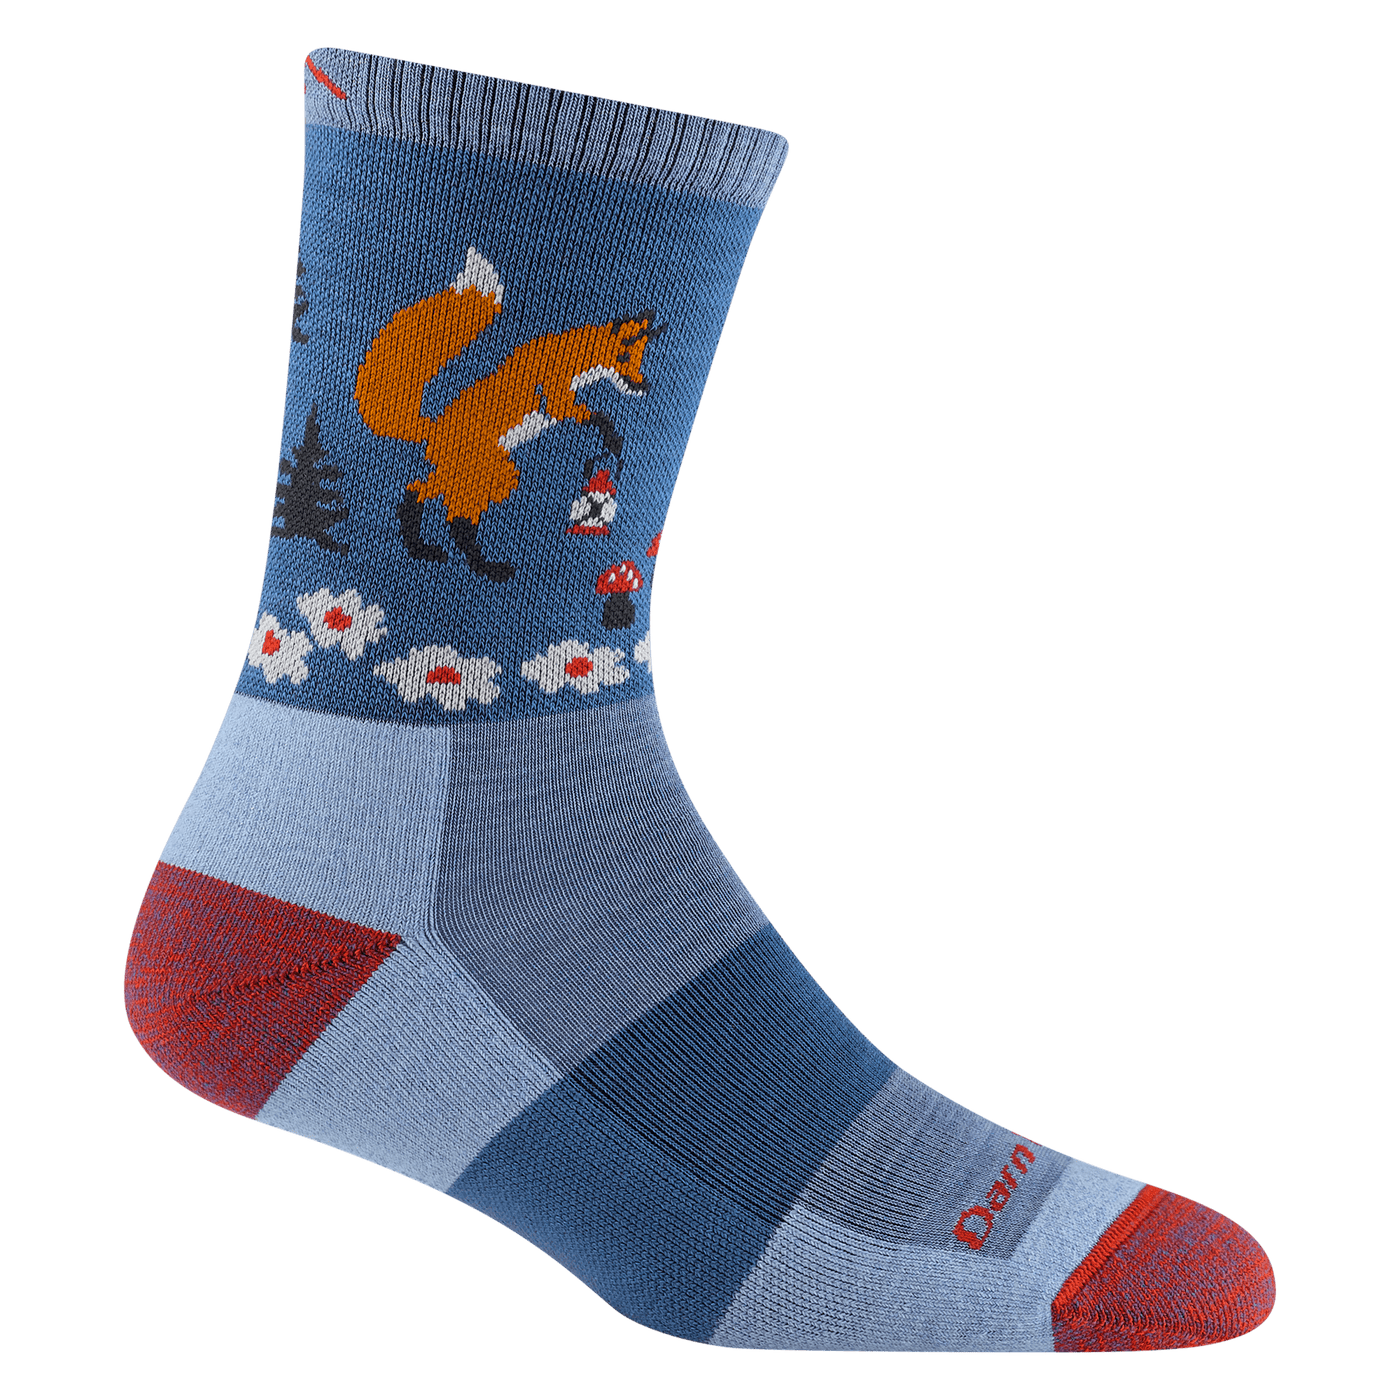 Critter Club, Women's Lightweight Micro Crew with Cushion #5001 - Darn Tough - The Sock Monster